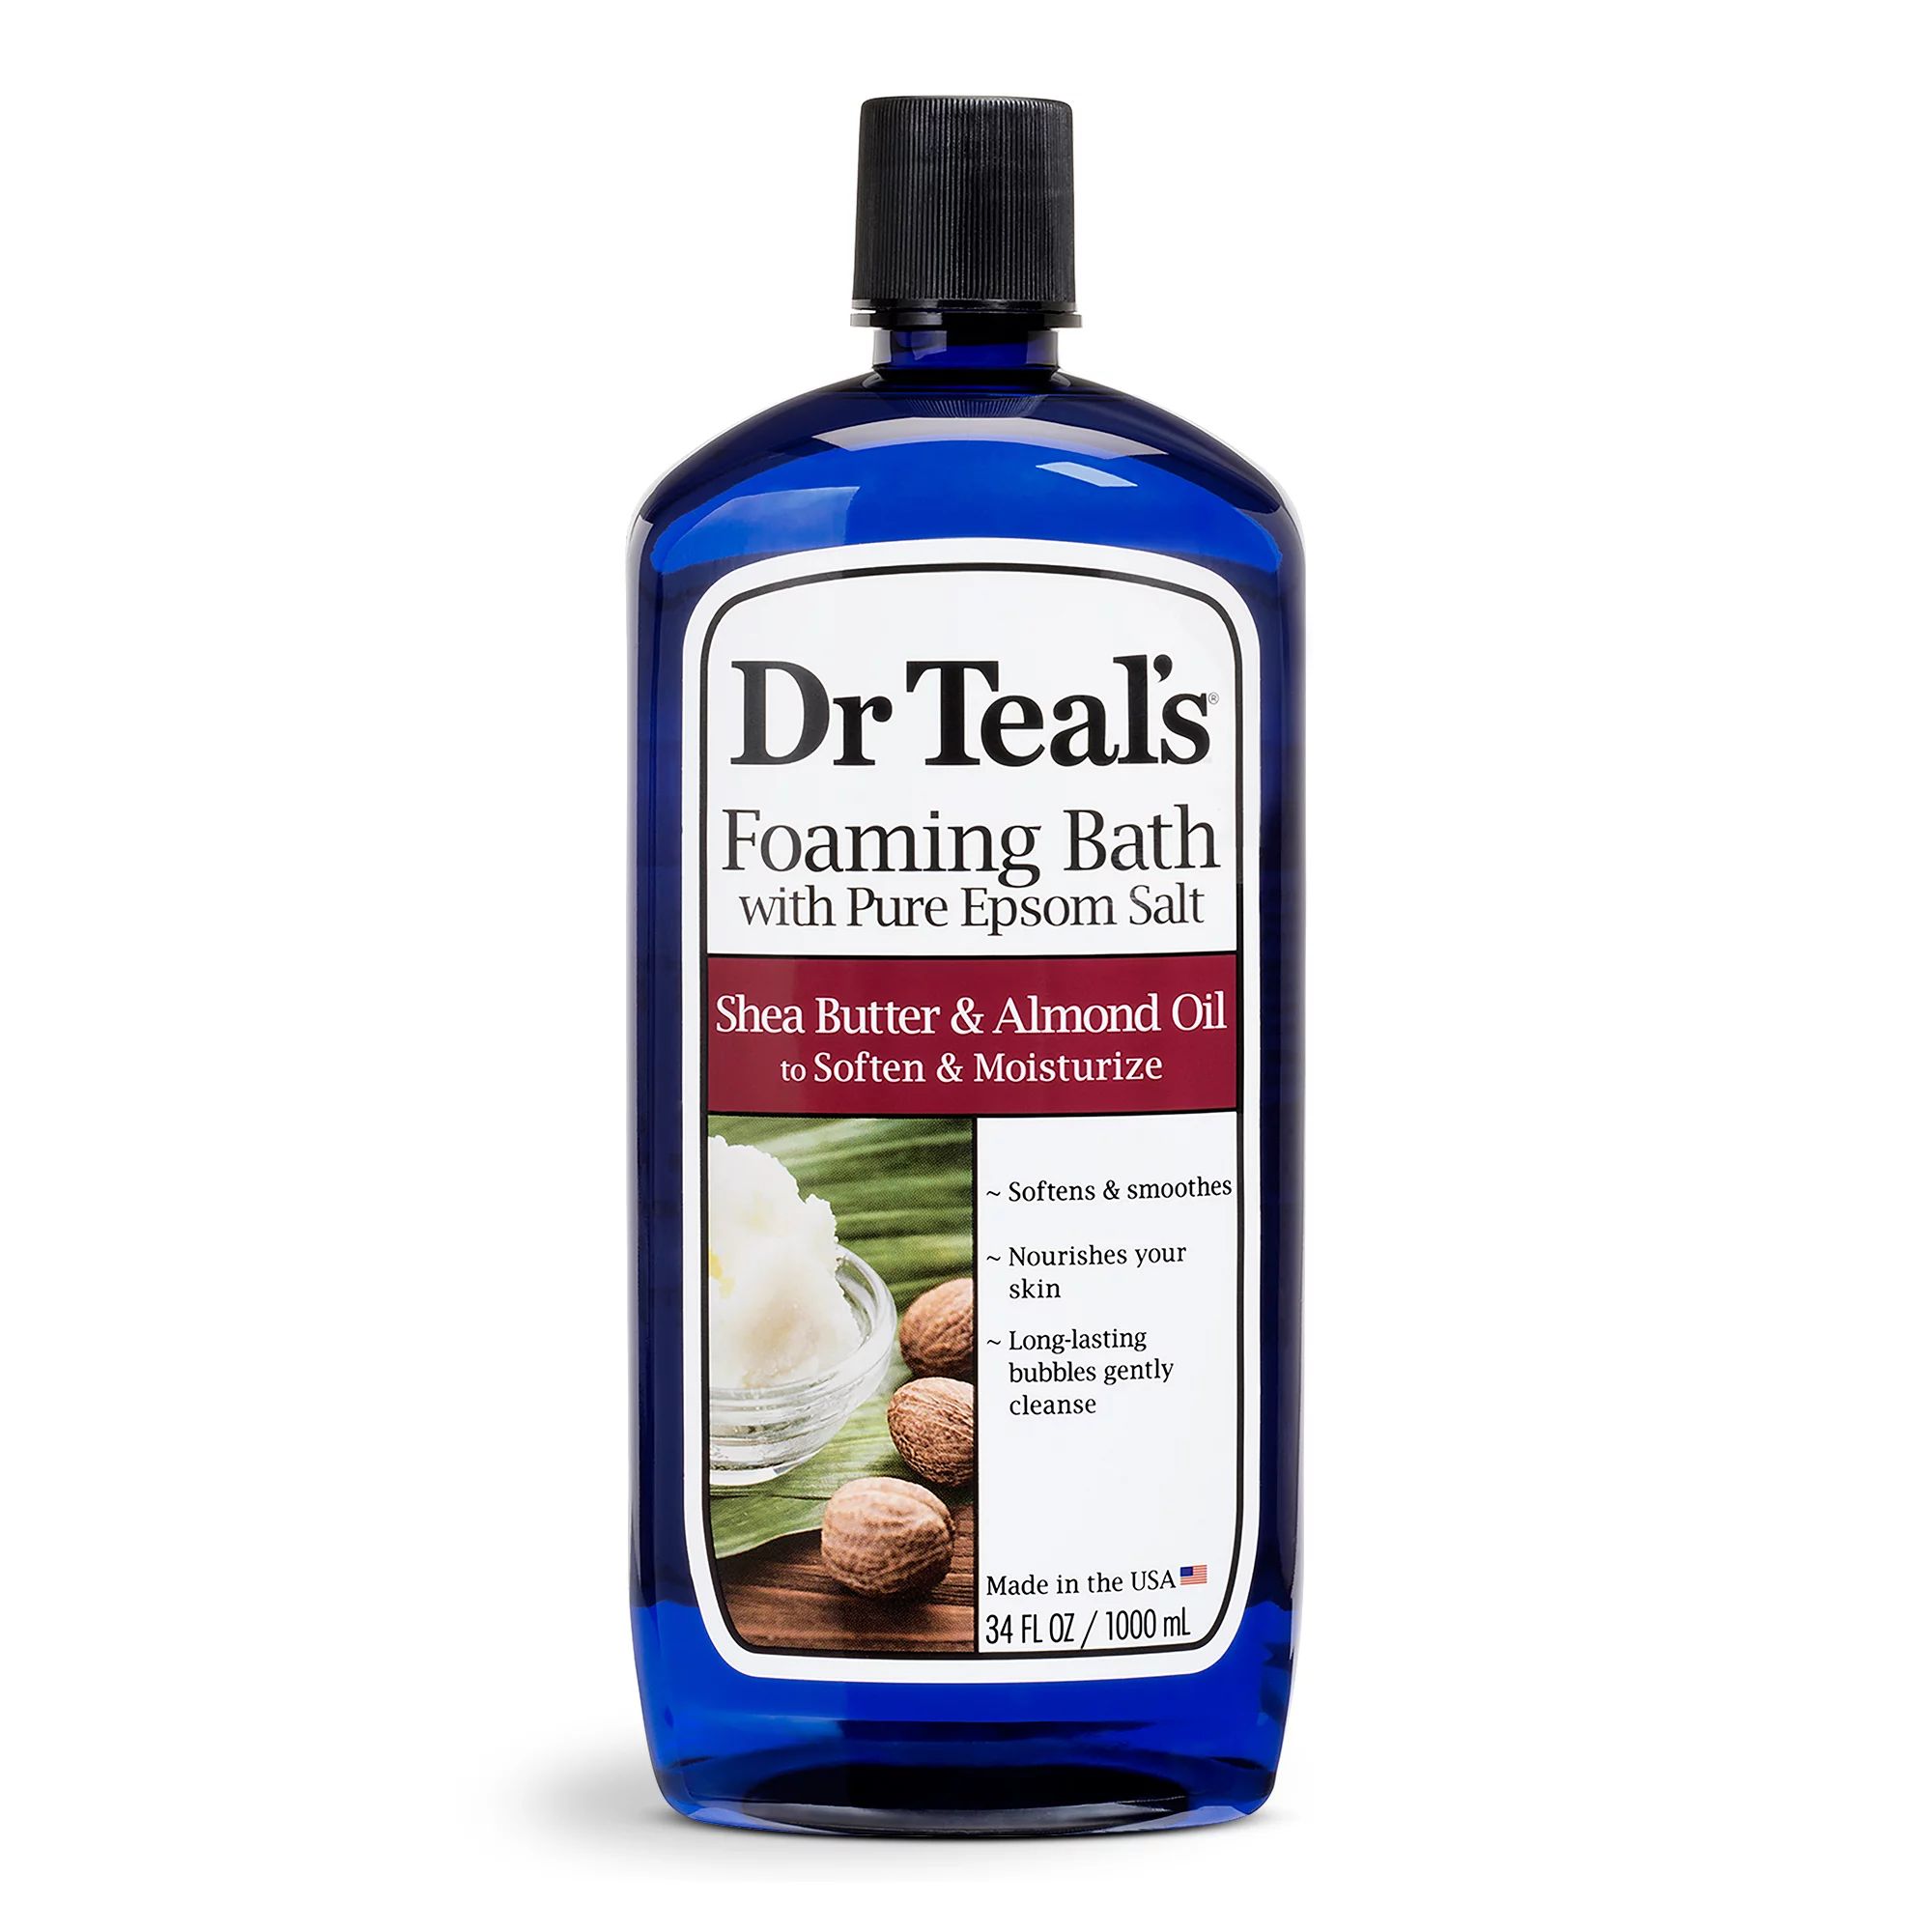 Dr Teal's Foaming Bath with Pure Epsom Salt,  Soften & Moisturize with Shea Butter & Almond Oil, ... | Walmart (US)